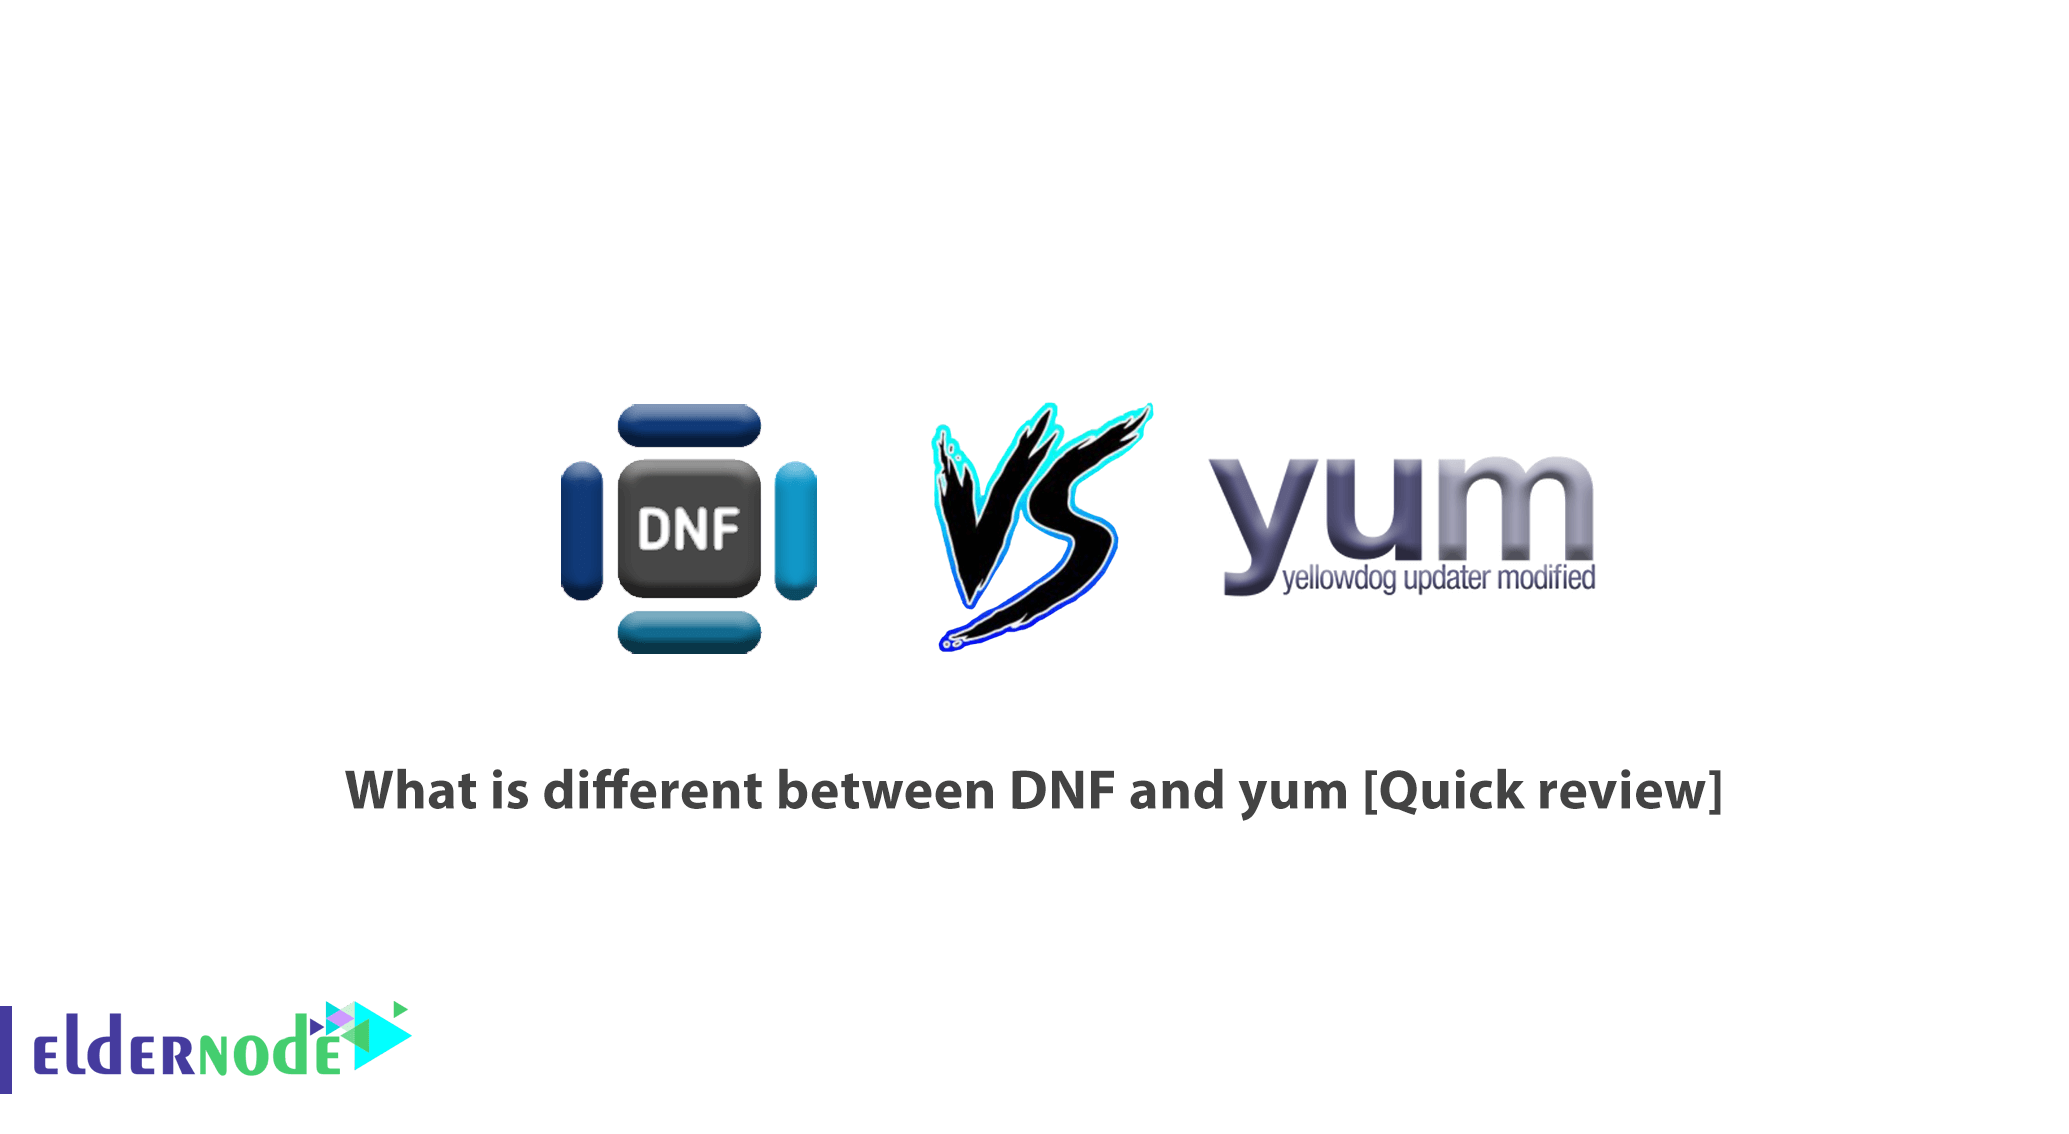 what is different between DNF and yum [Quick review]